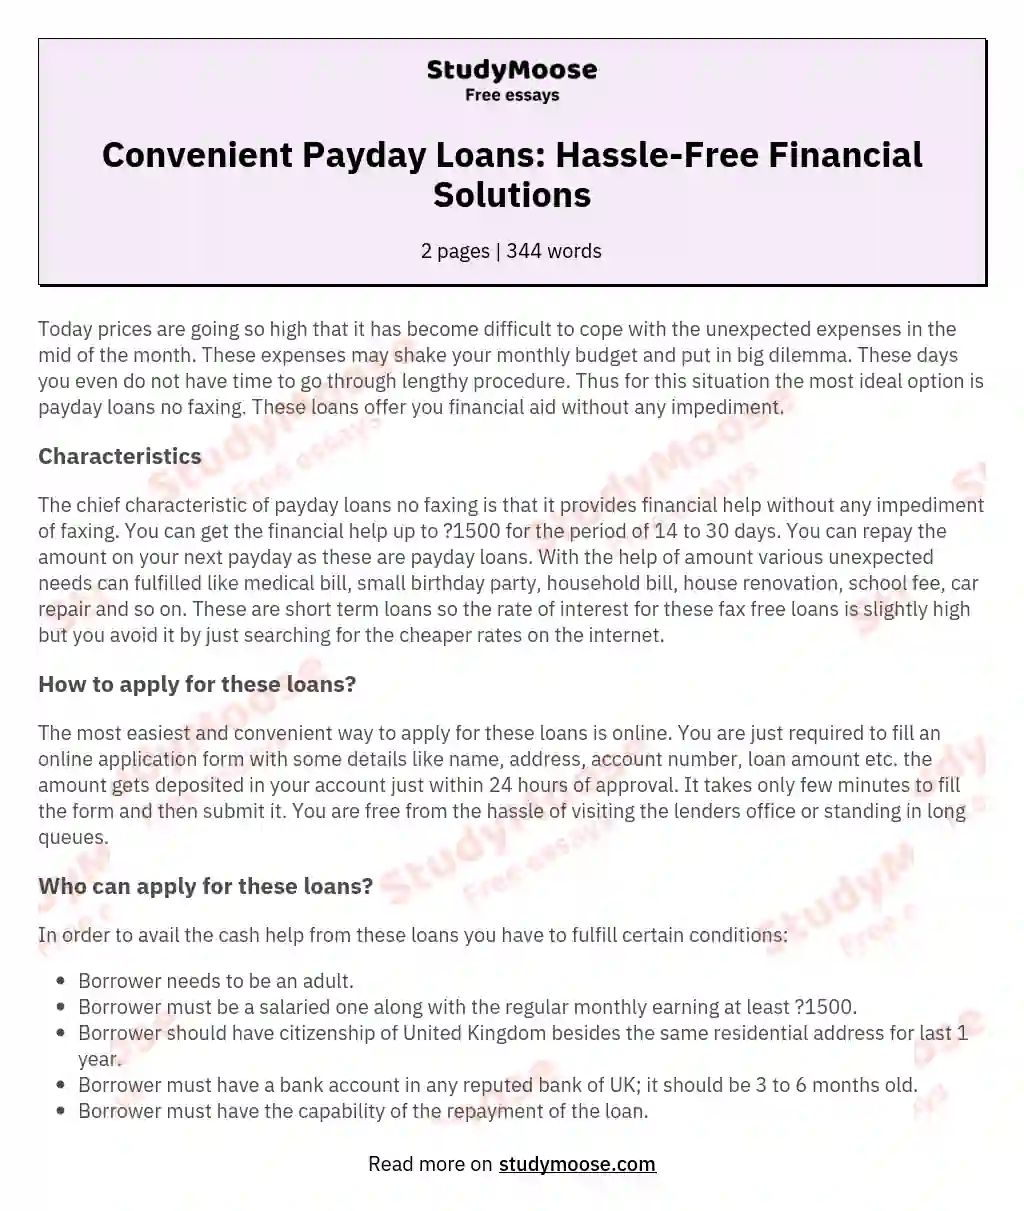 Convenient Payday Loans: Hassle-Free Financial Solutions essay